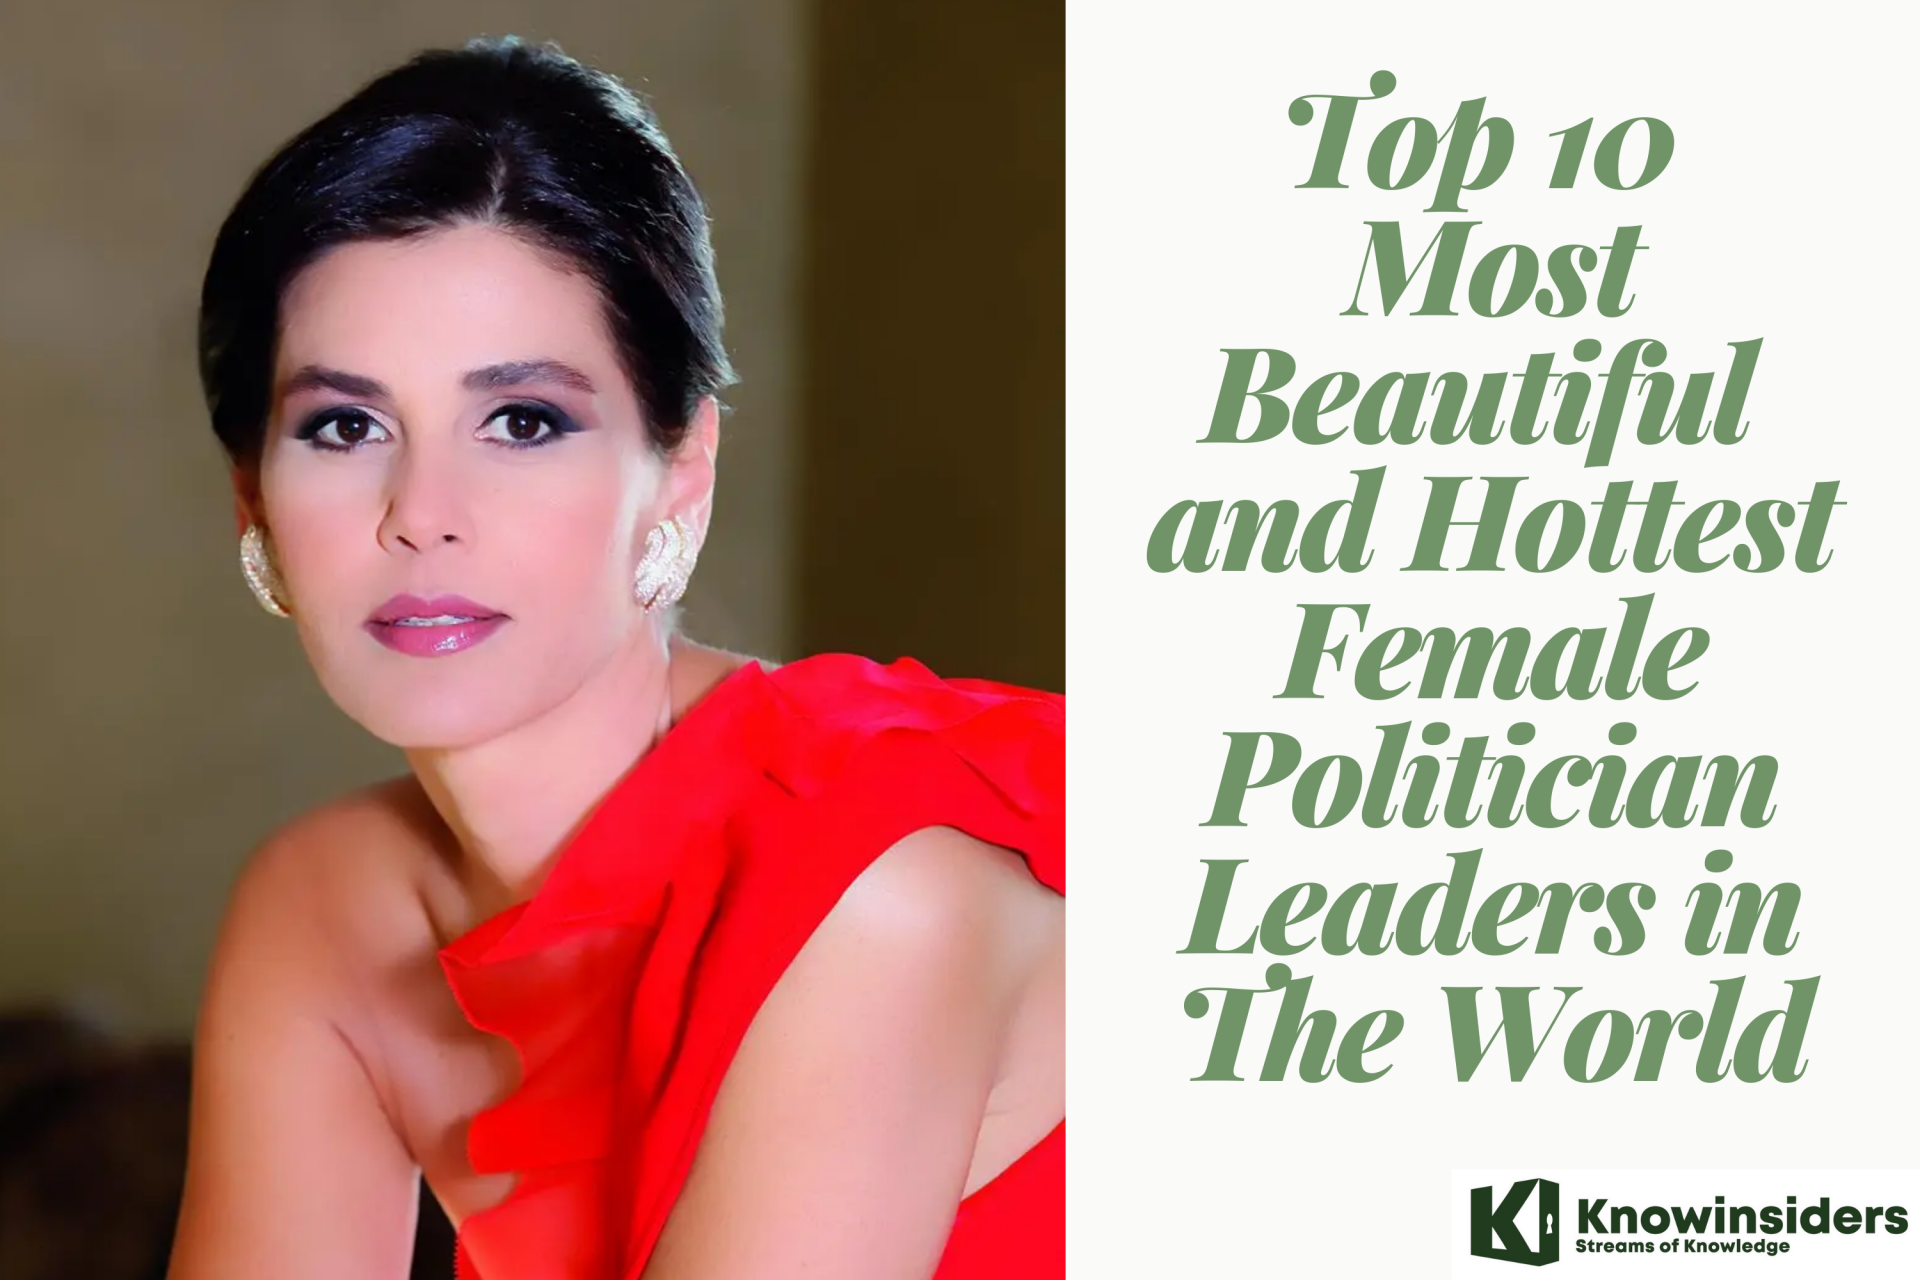 Top 10 Most Beautiful Female Political Leaders in the World - Updated